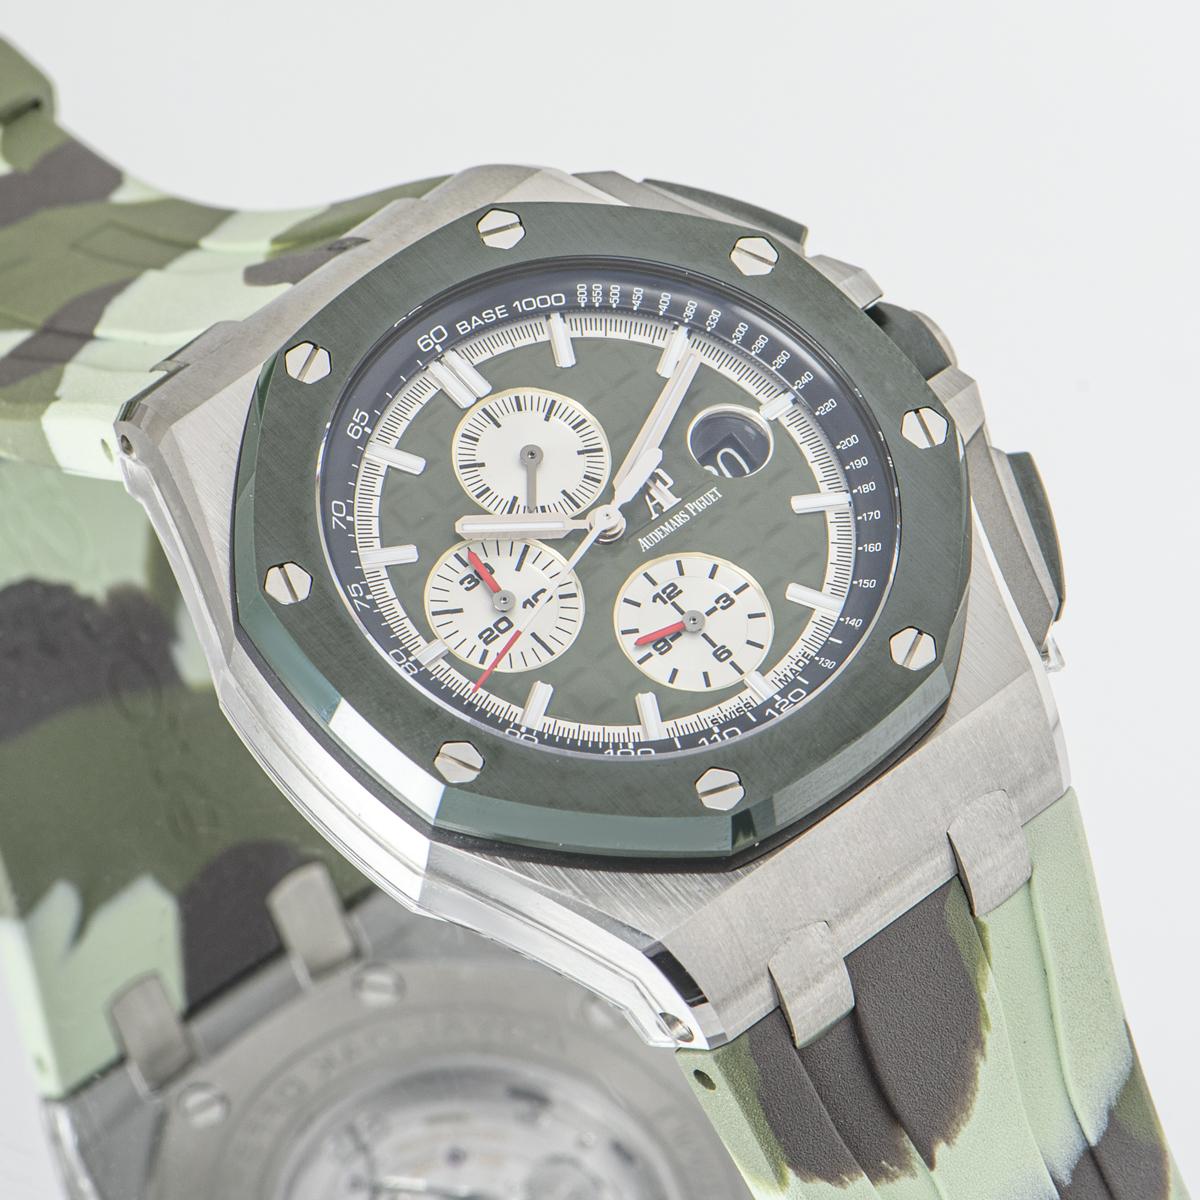 Limited to 400 pieces worldwide, this green camo 44mm Royal Oak Offshore from Audemars Piguet in stainless steel is in unworn condition. A khaki green 